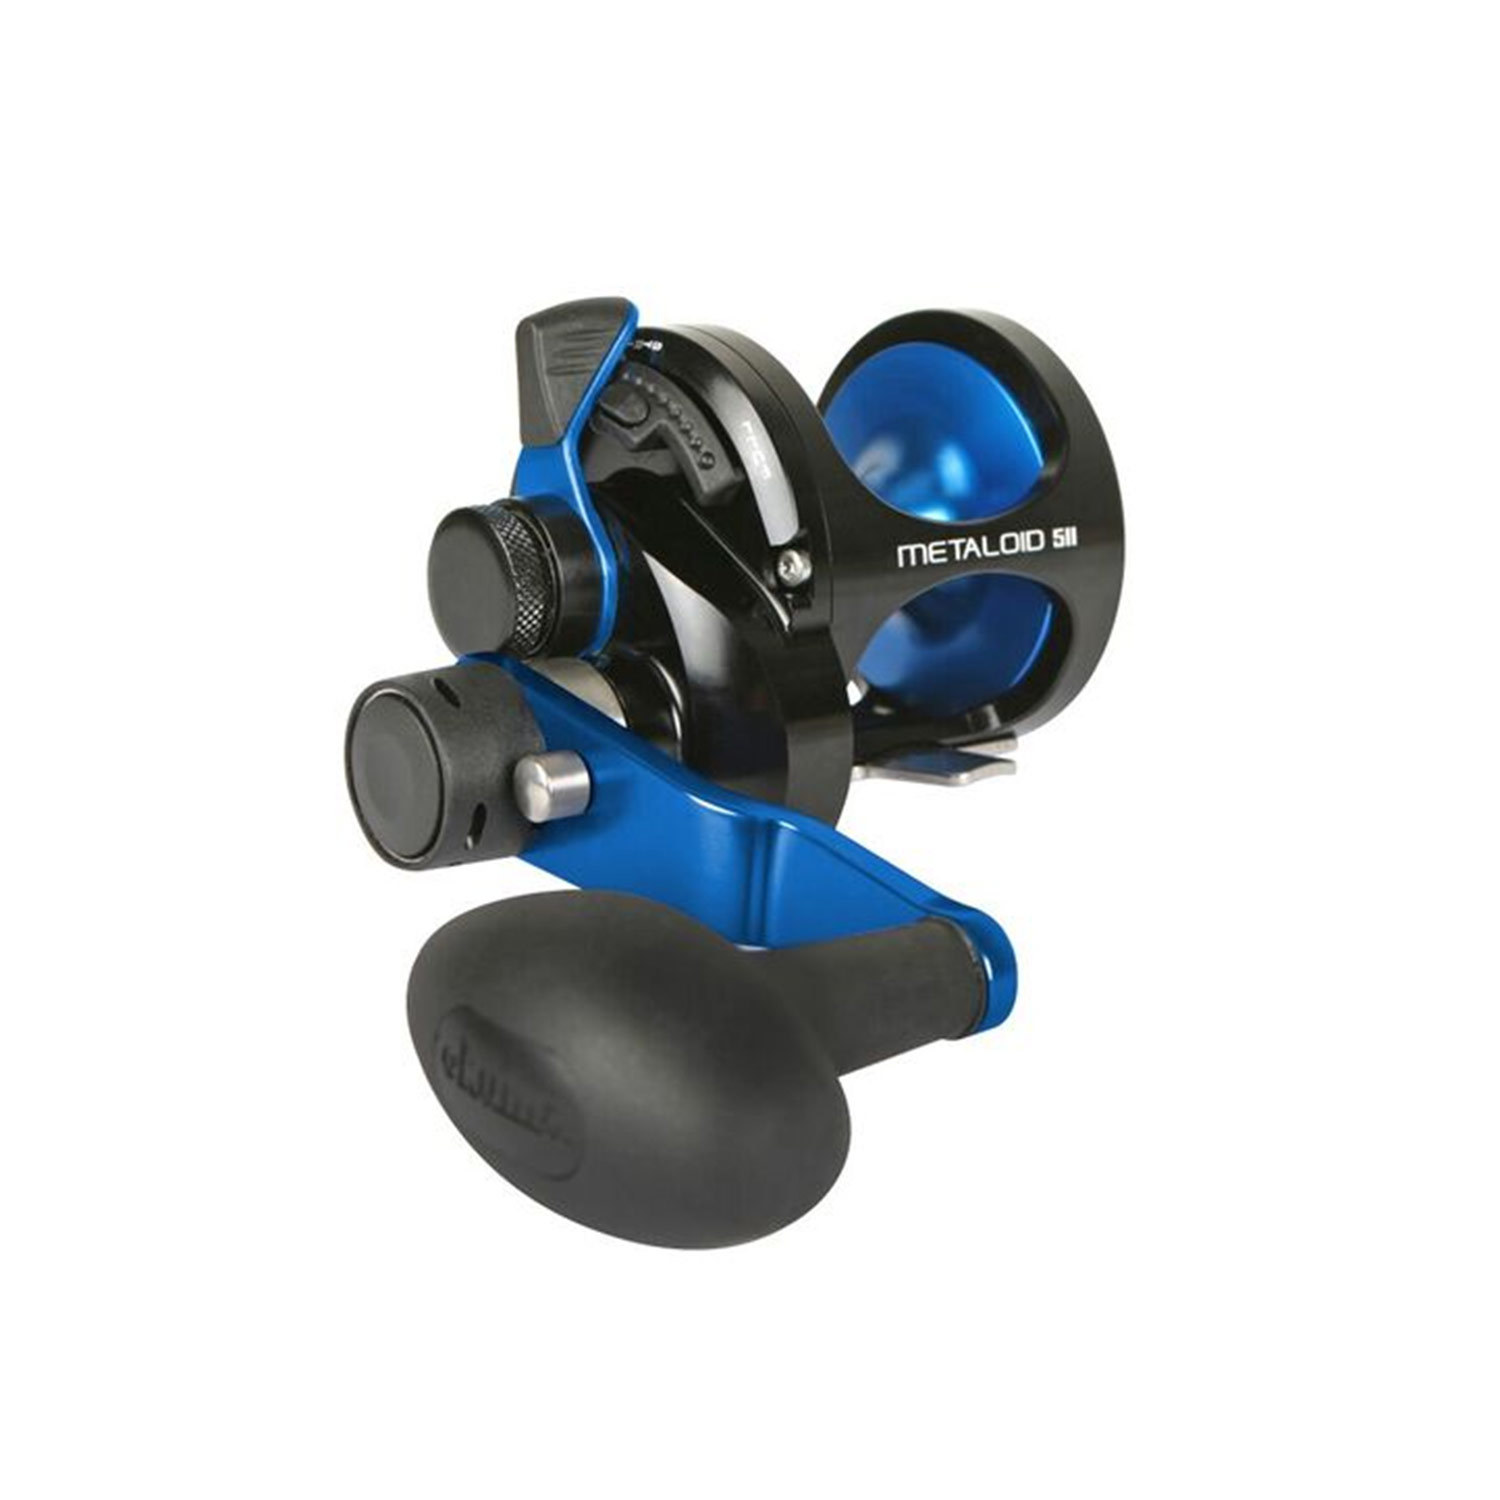 Metaloid M-5IIB Two-Speed Lever Drag Conventional Reel